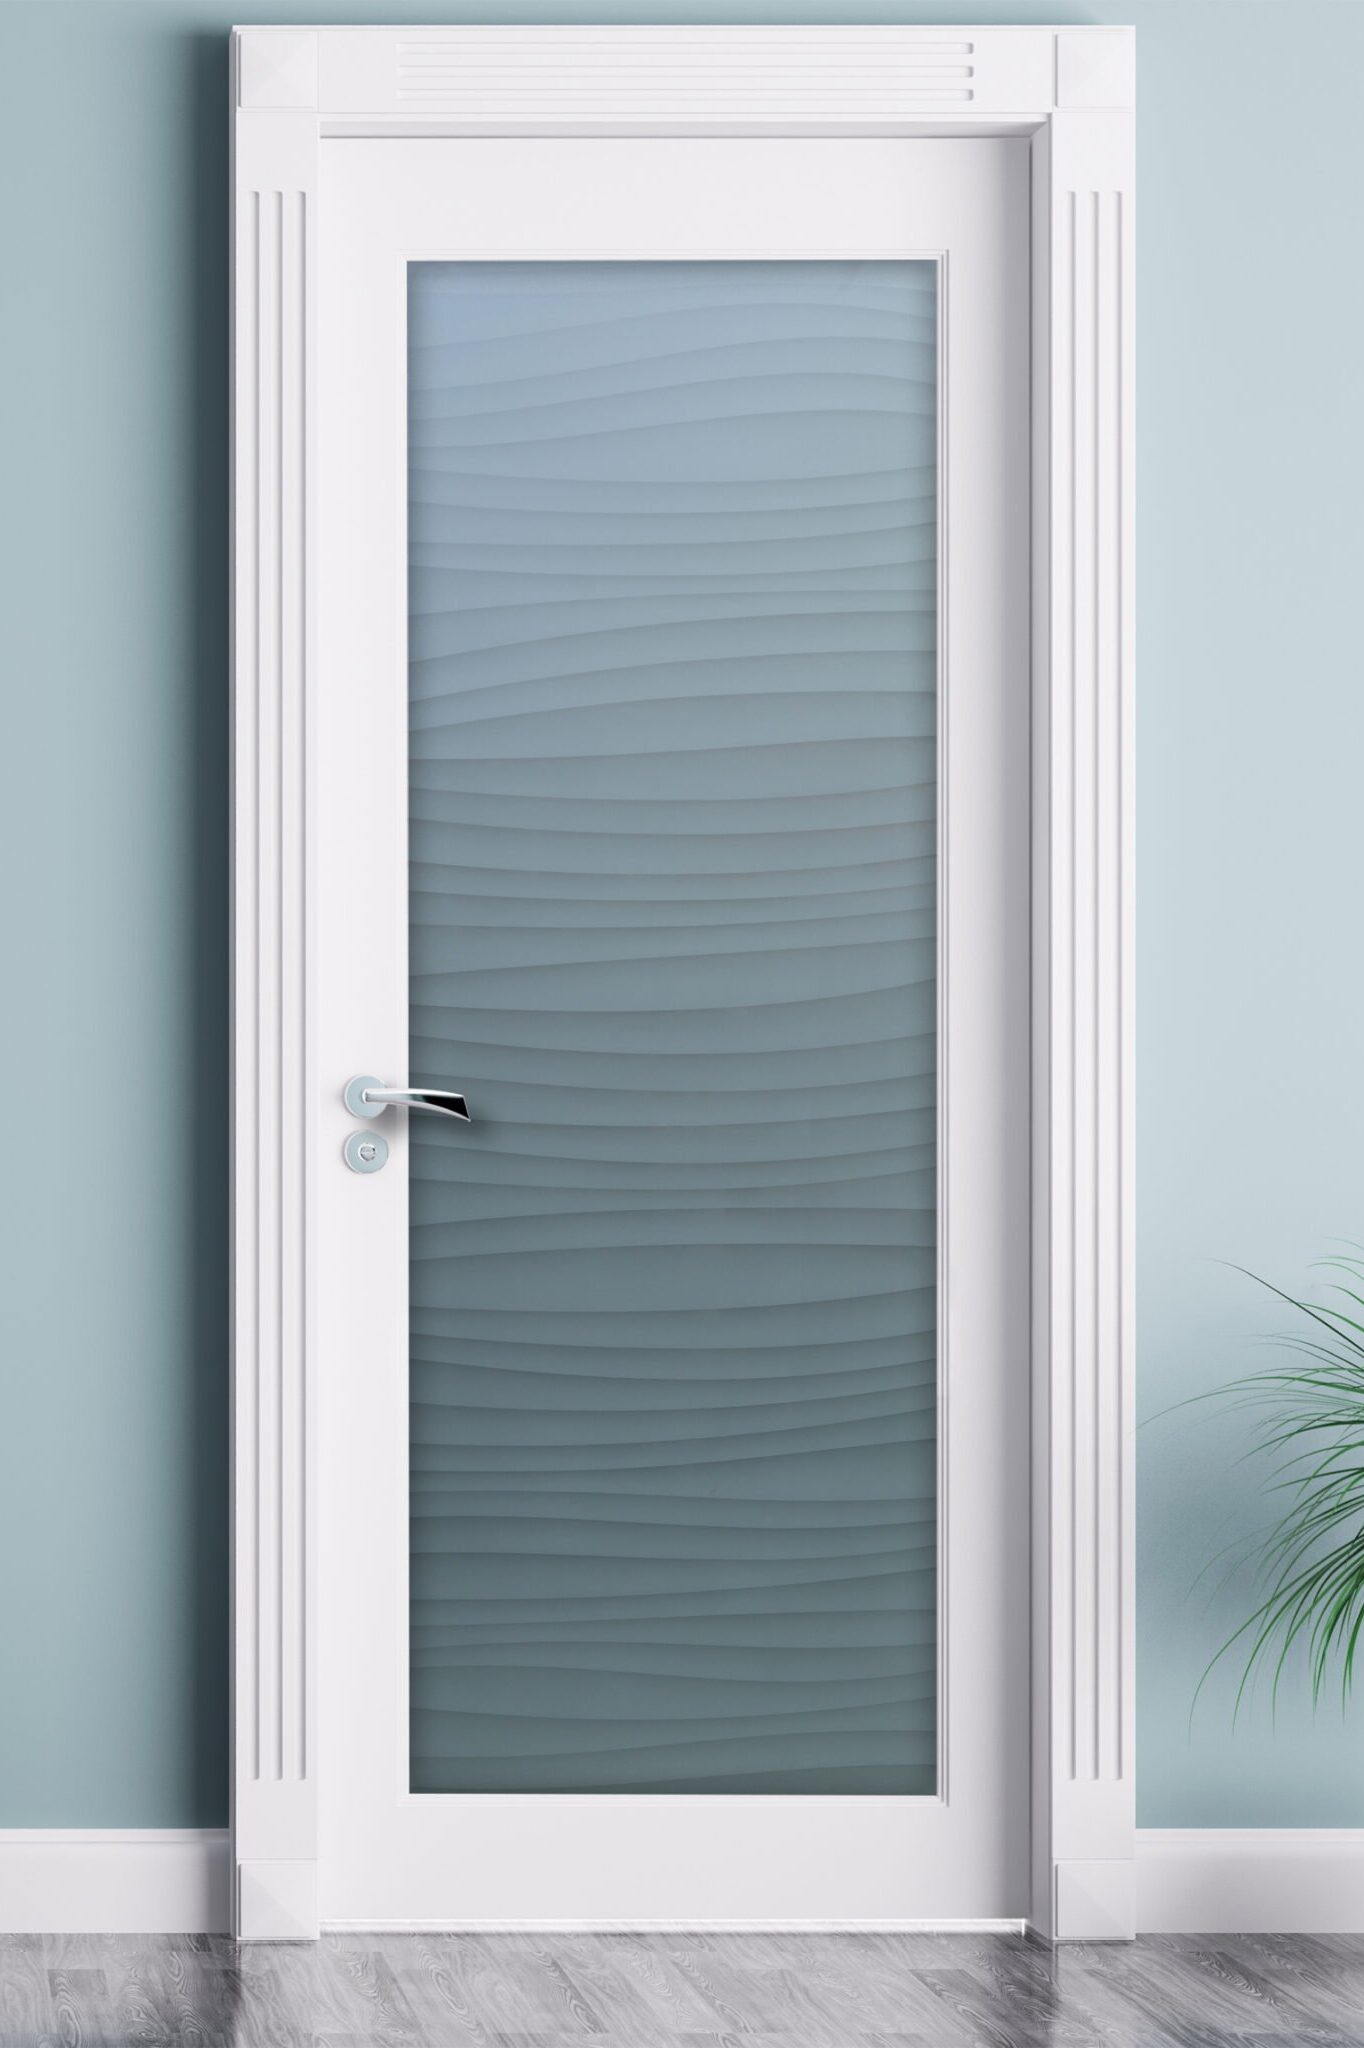 Nokes Waves Private 2D Enhanced Private Interior Frosted Glass Doors Modern Oceanic Decor Sans Soucie